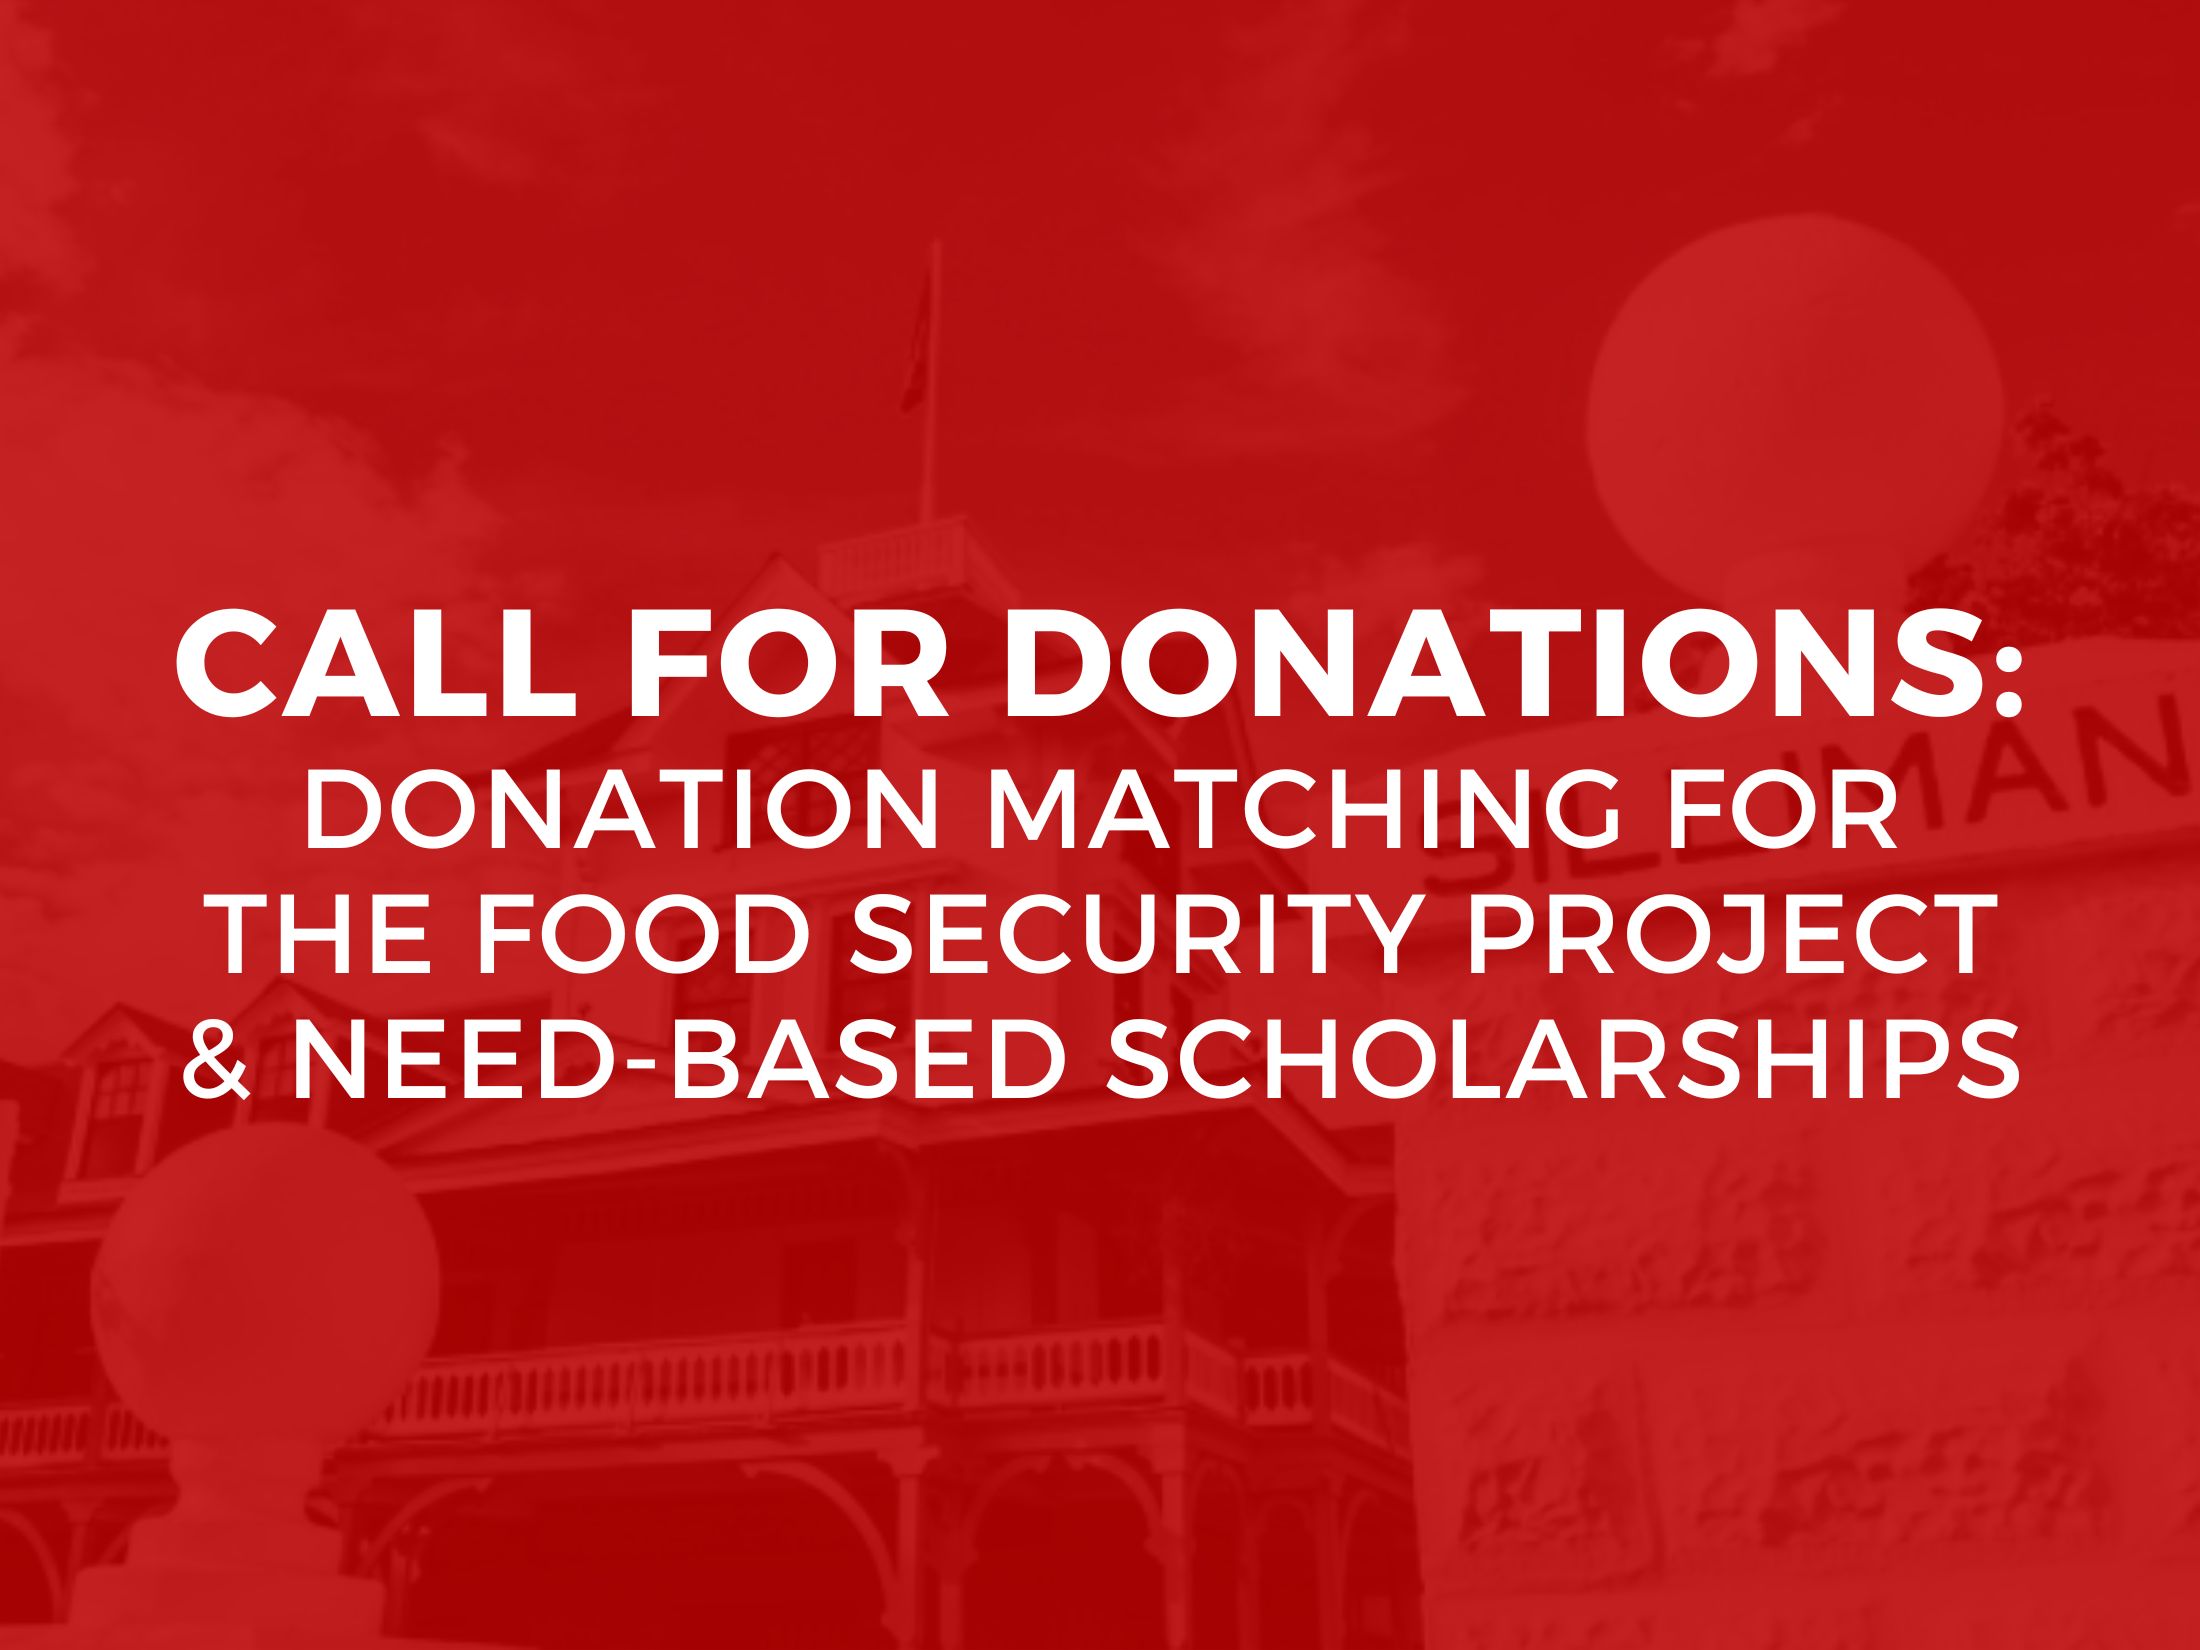 Call for Donations: Donation Match for the Food Security Project and Need-Based Scholarships